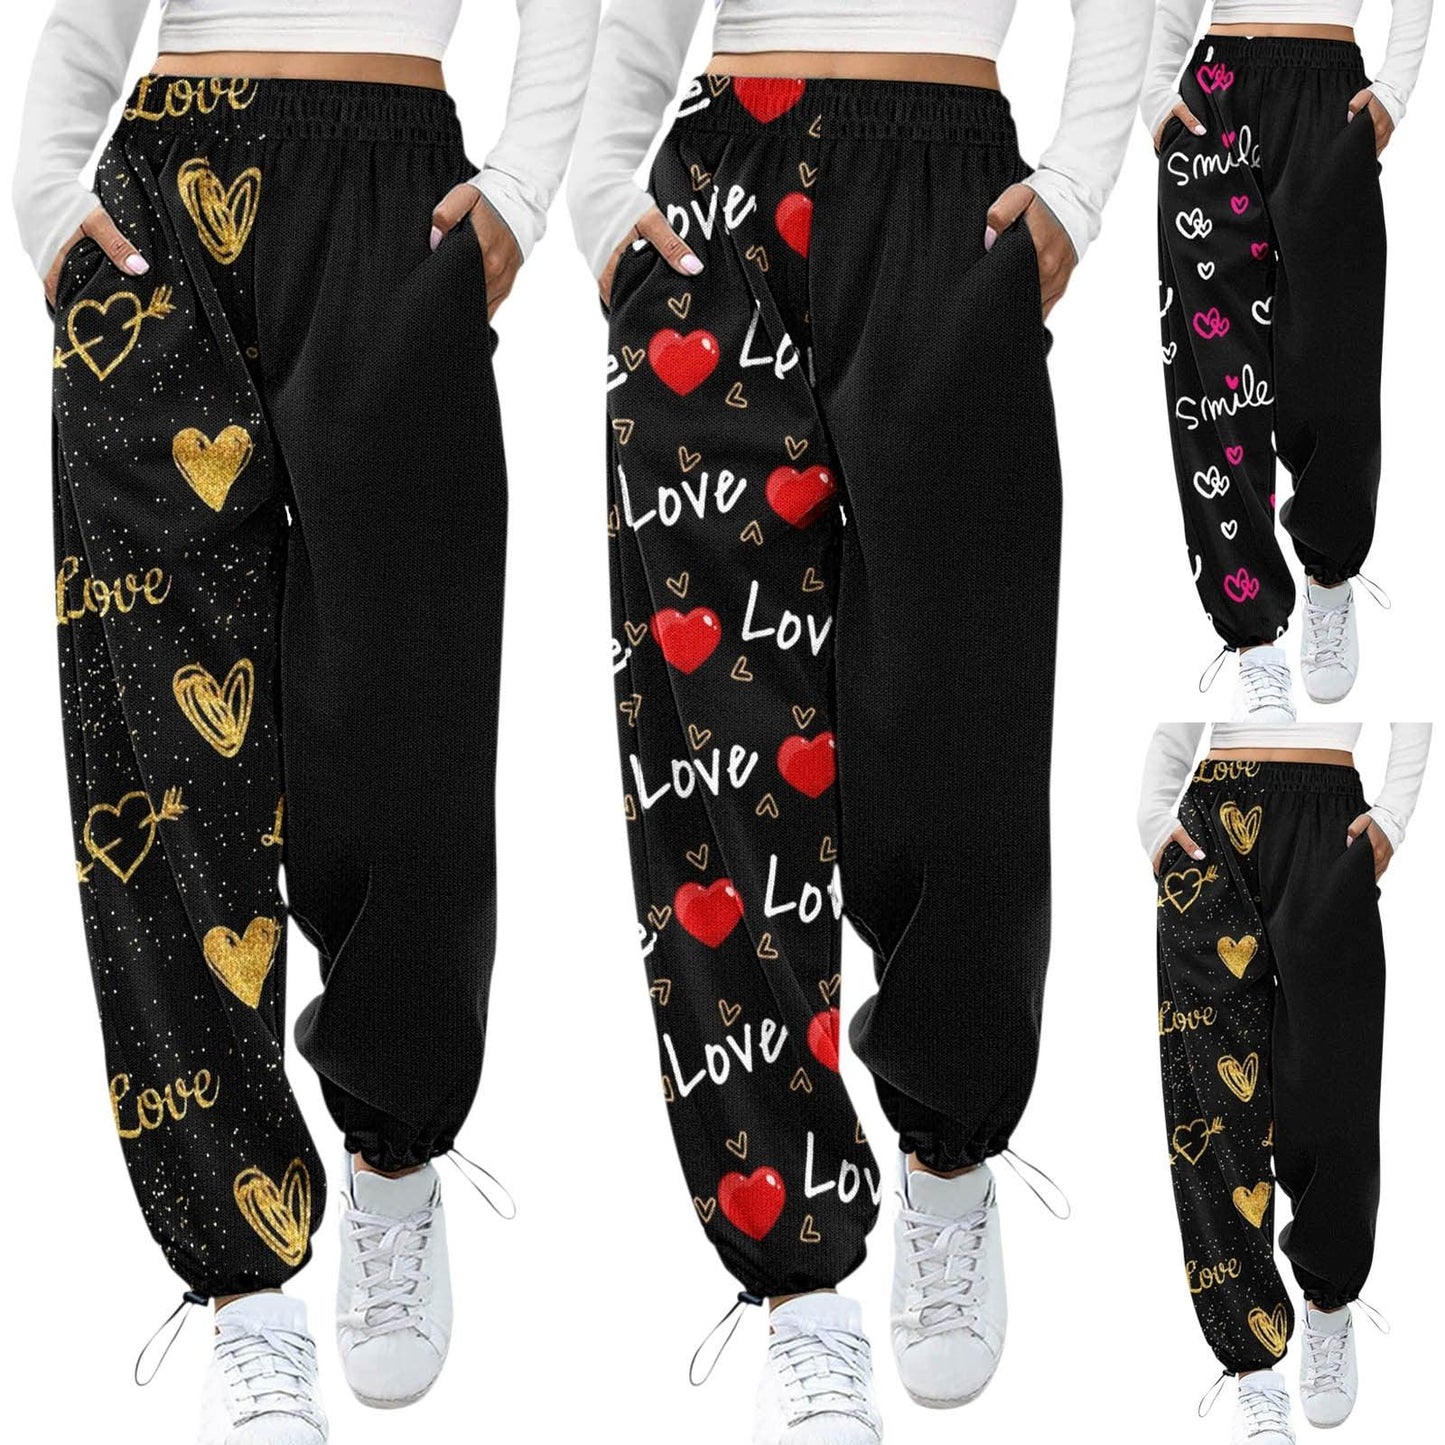 Sweatpants Pockets High Waist Sporty Gym Athletic Fit Jogger Pants - Twin Chronicles 